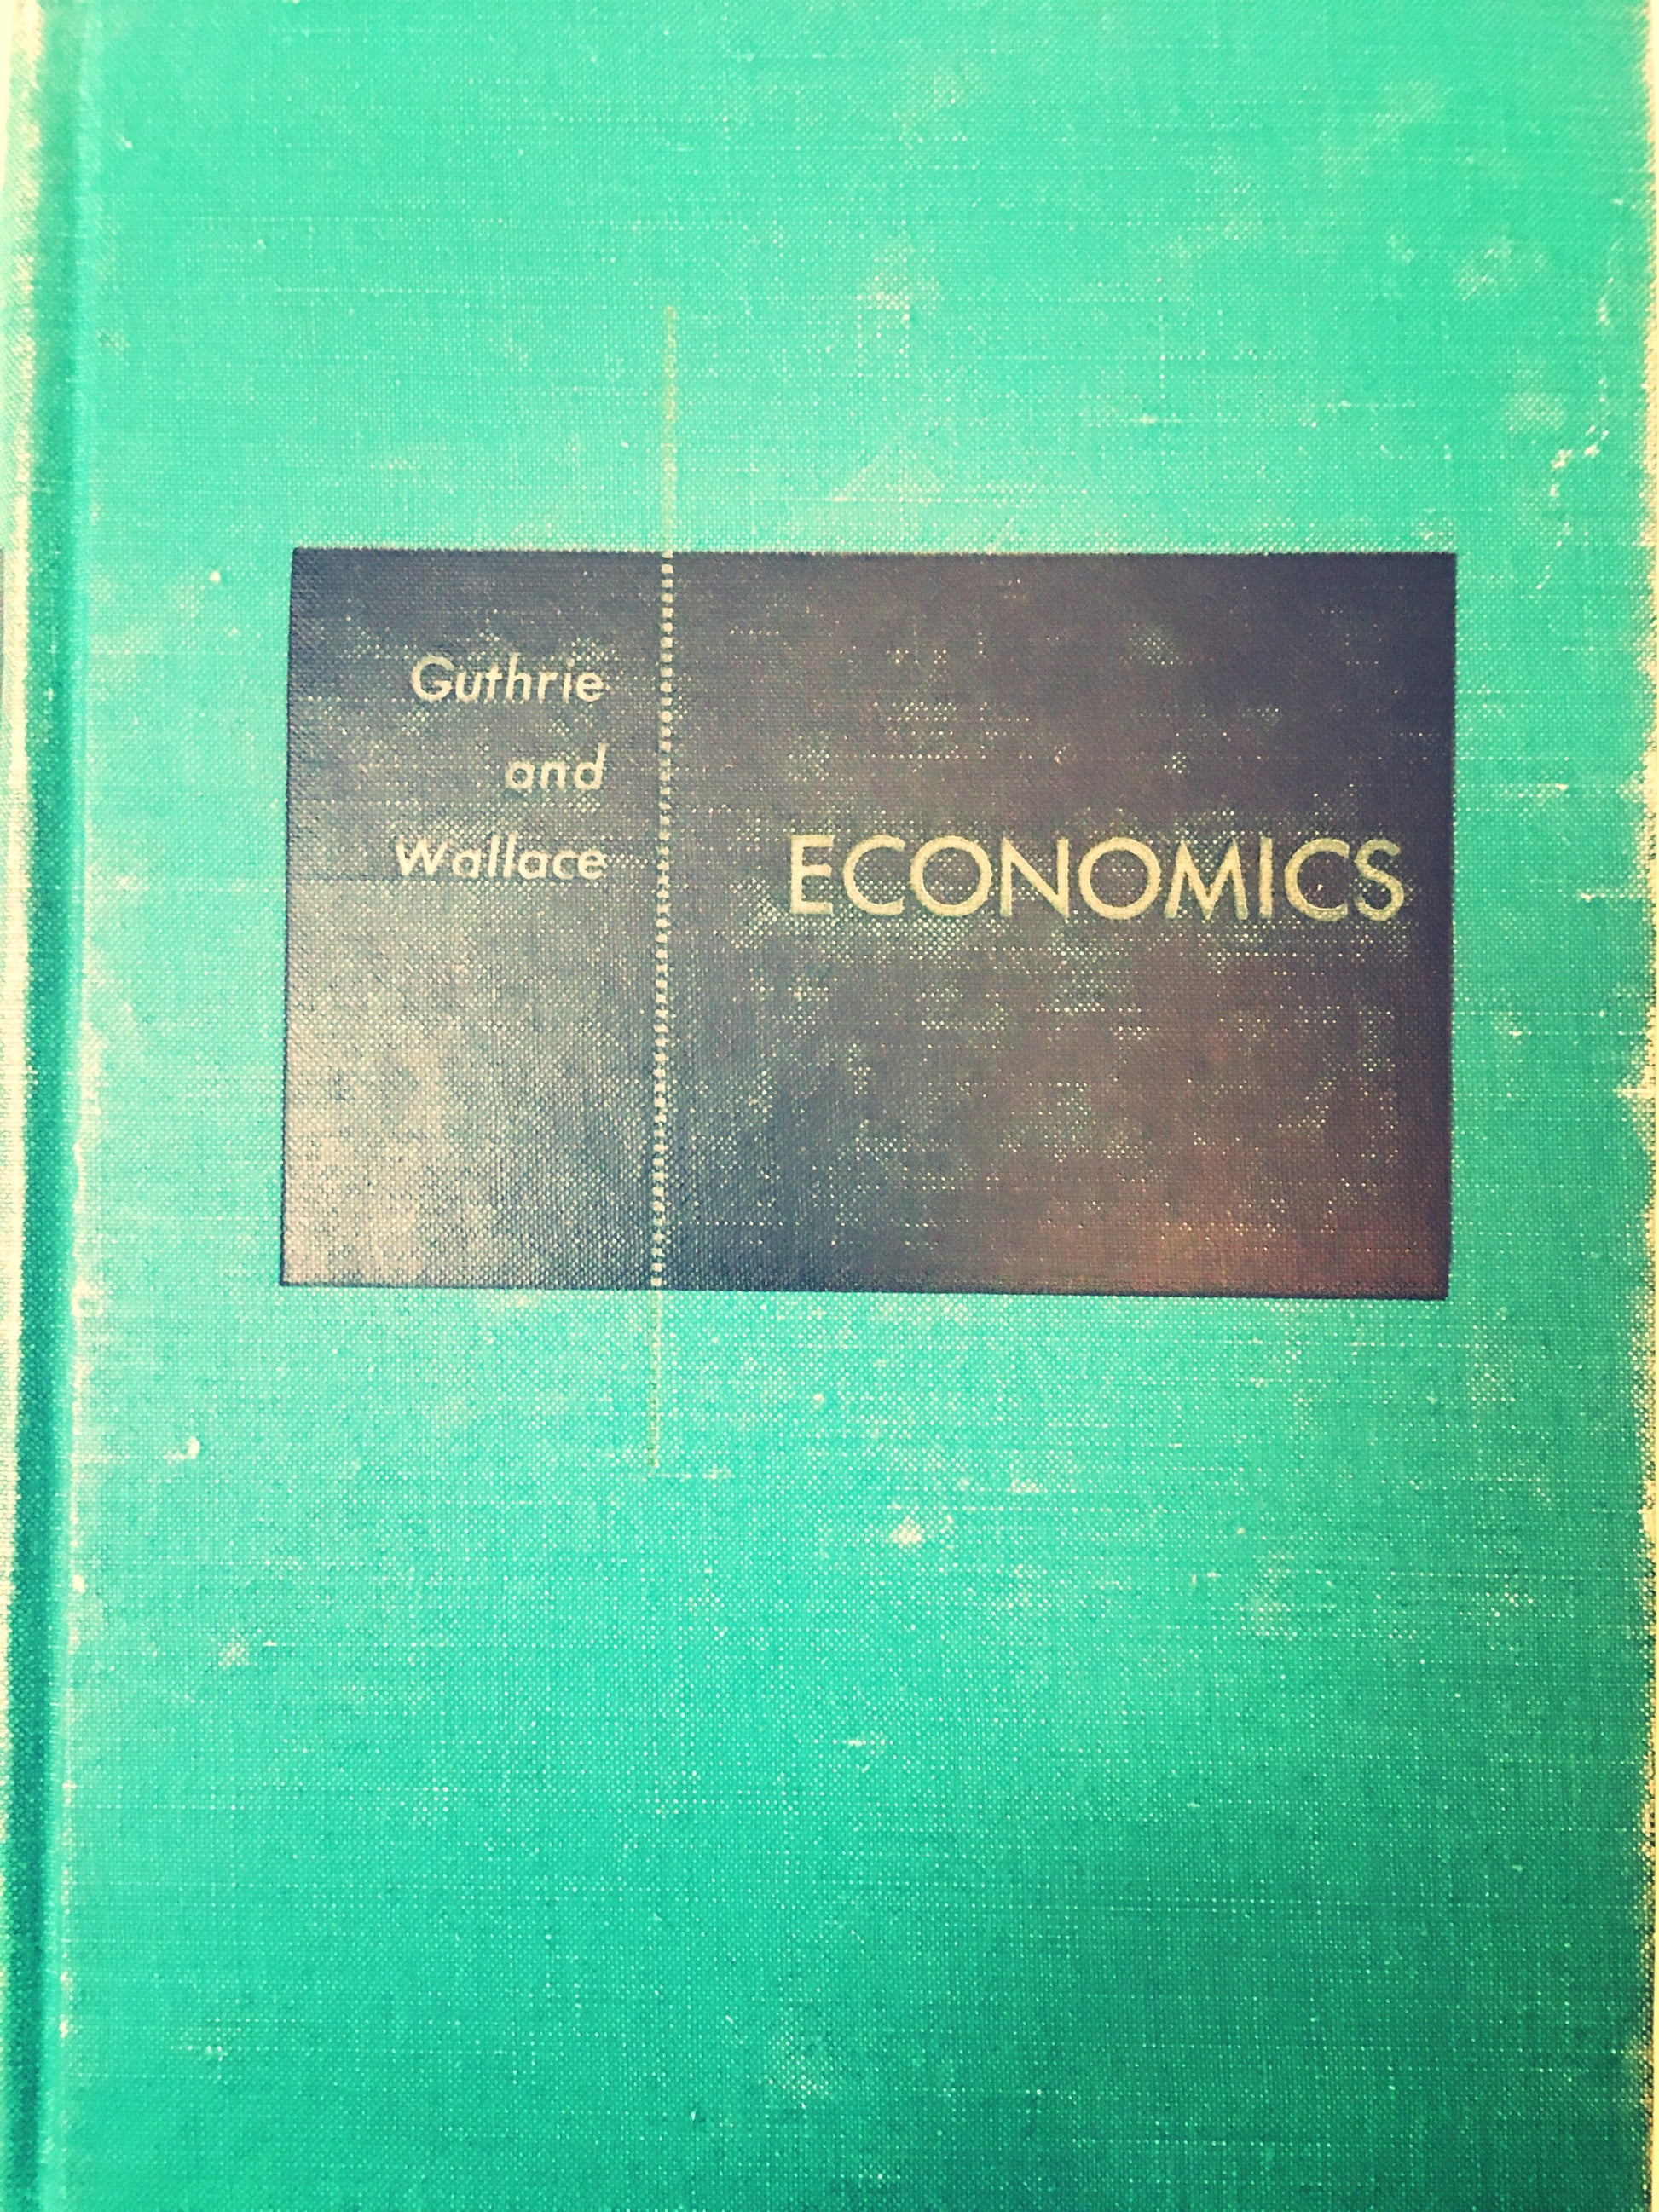 1965 Vintage Economics book by Guthrie and Robert Wallace. capitalism, politics. Free thinking. Prop set green decor